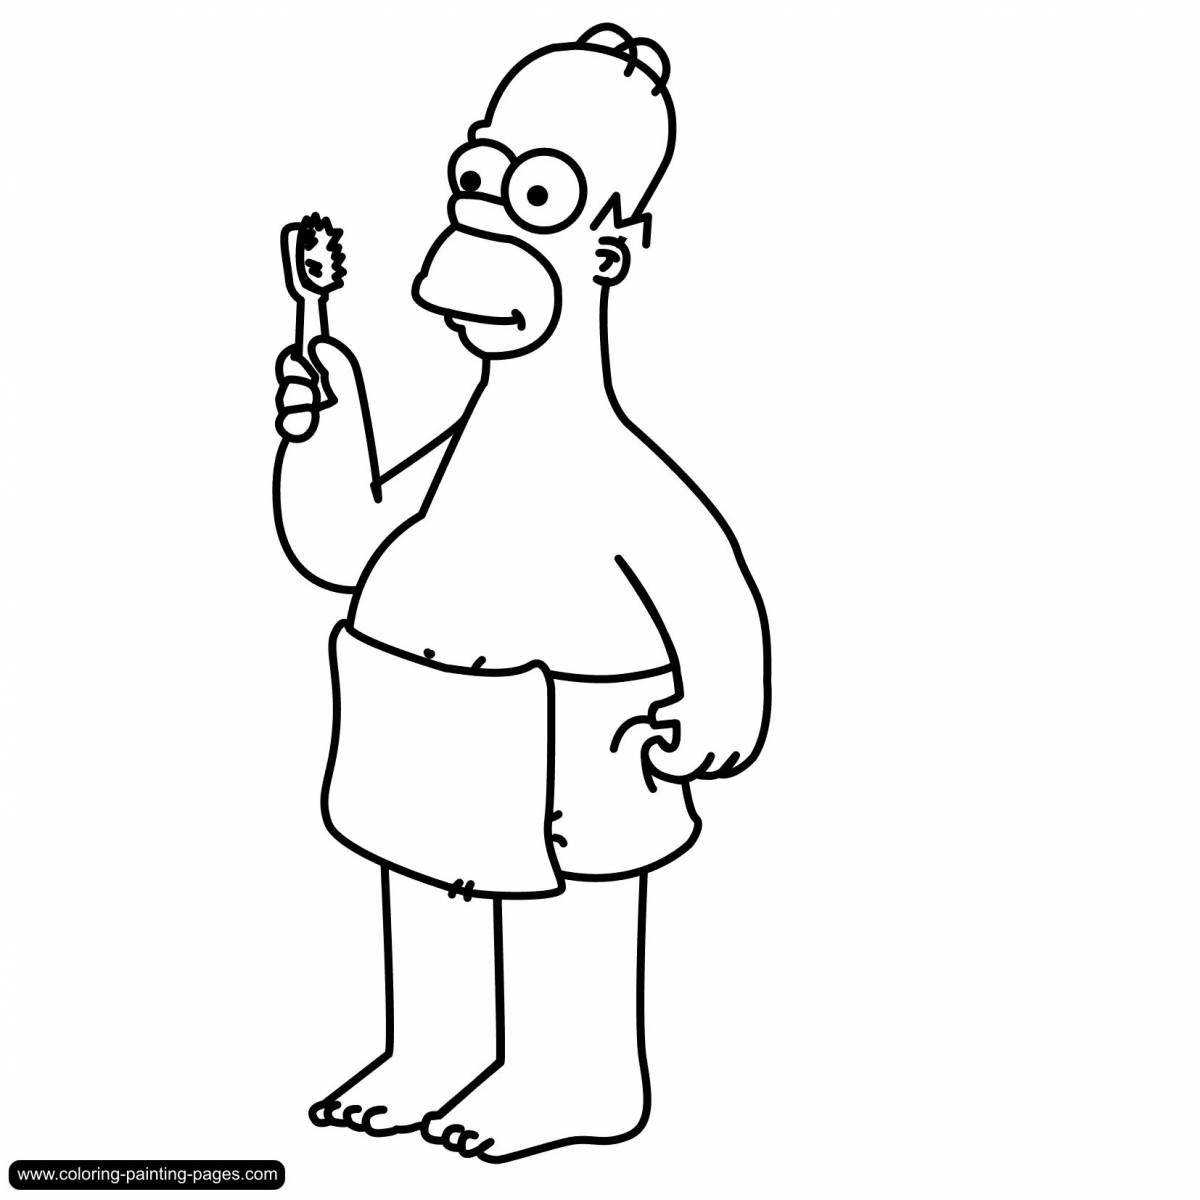 Animated homer simpson coloring page